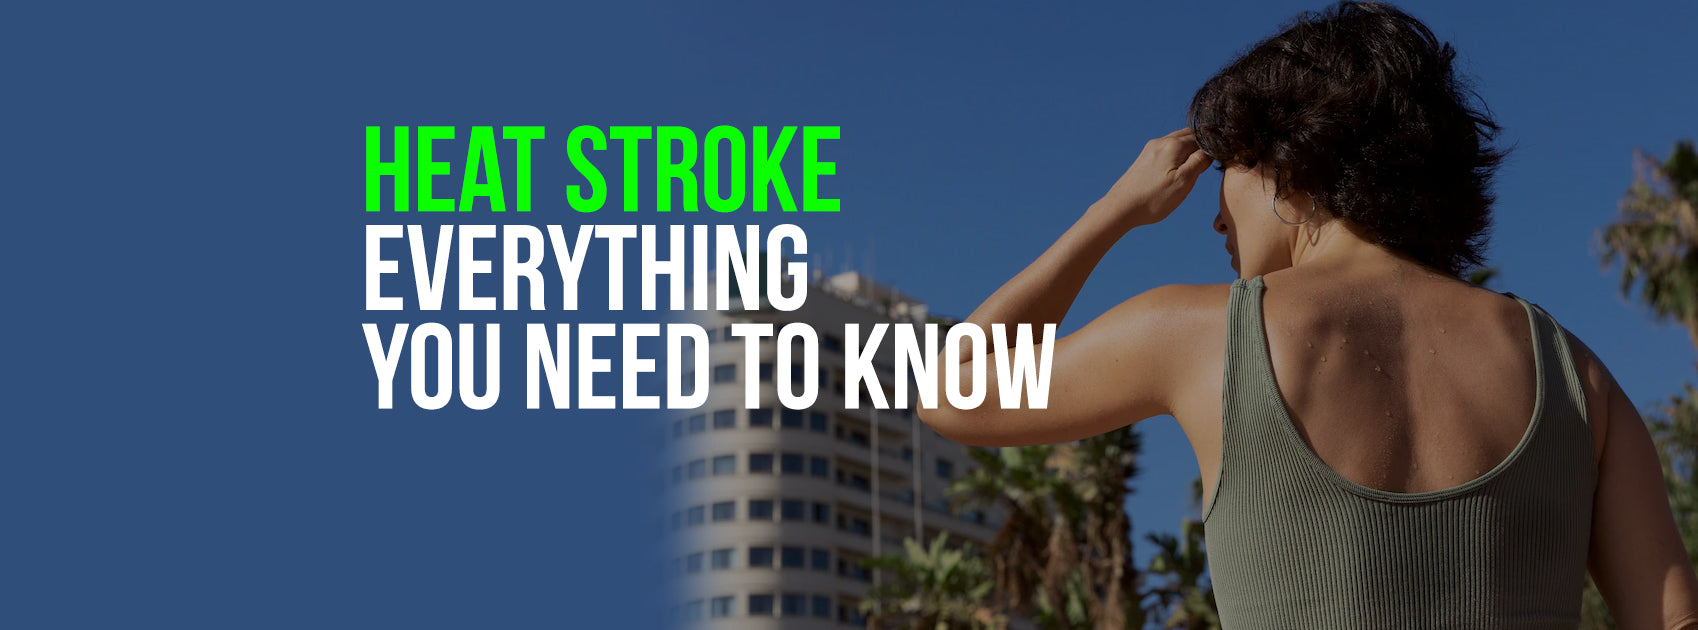 Heat Stroke - Everything You Need to Know